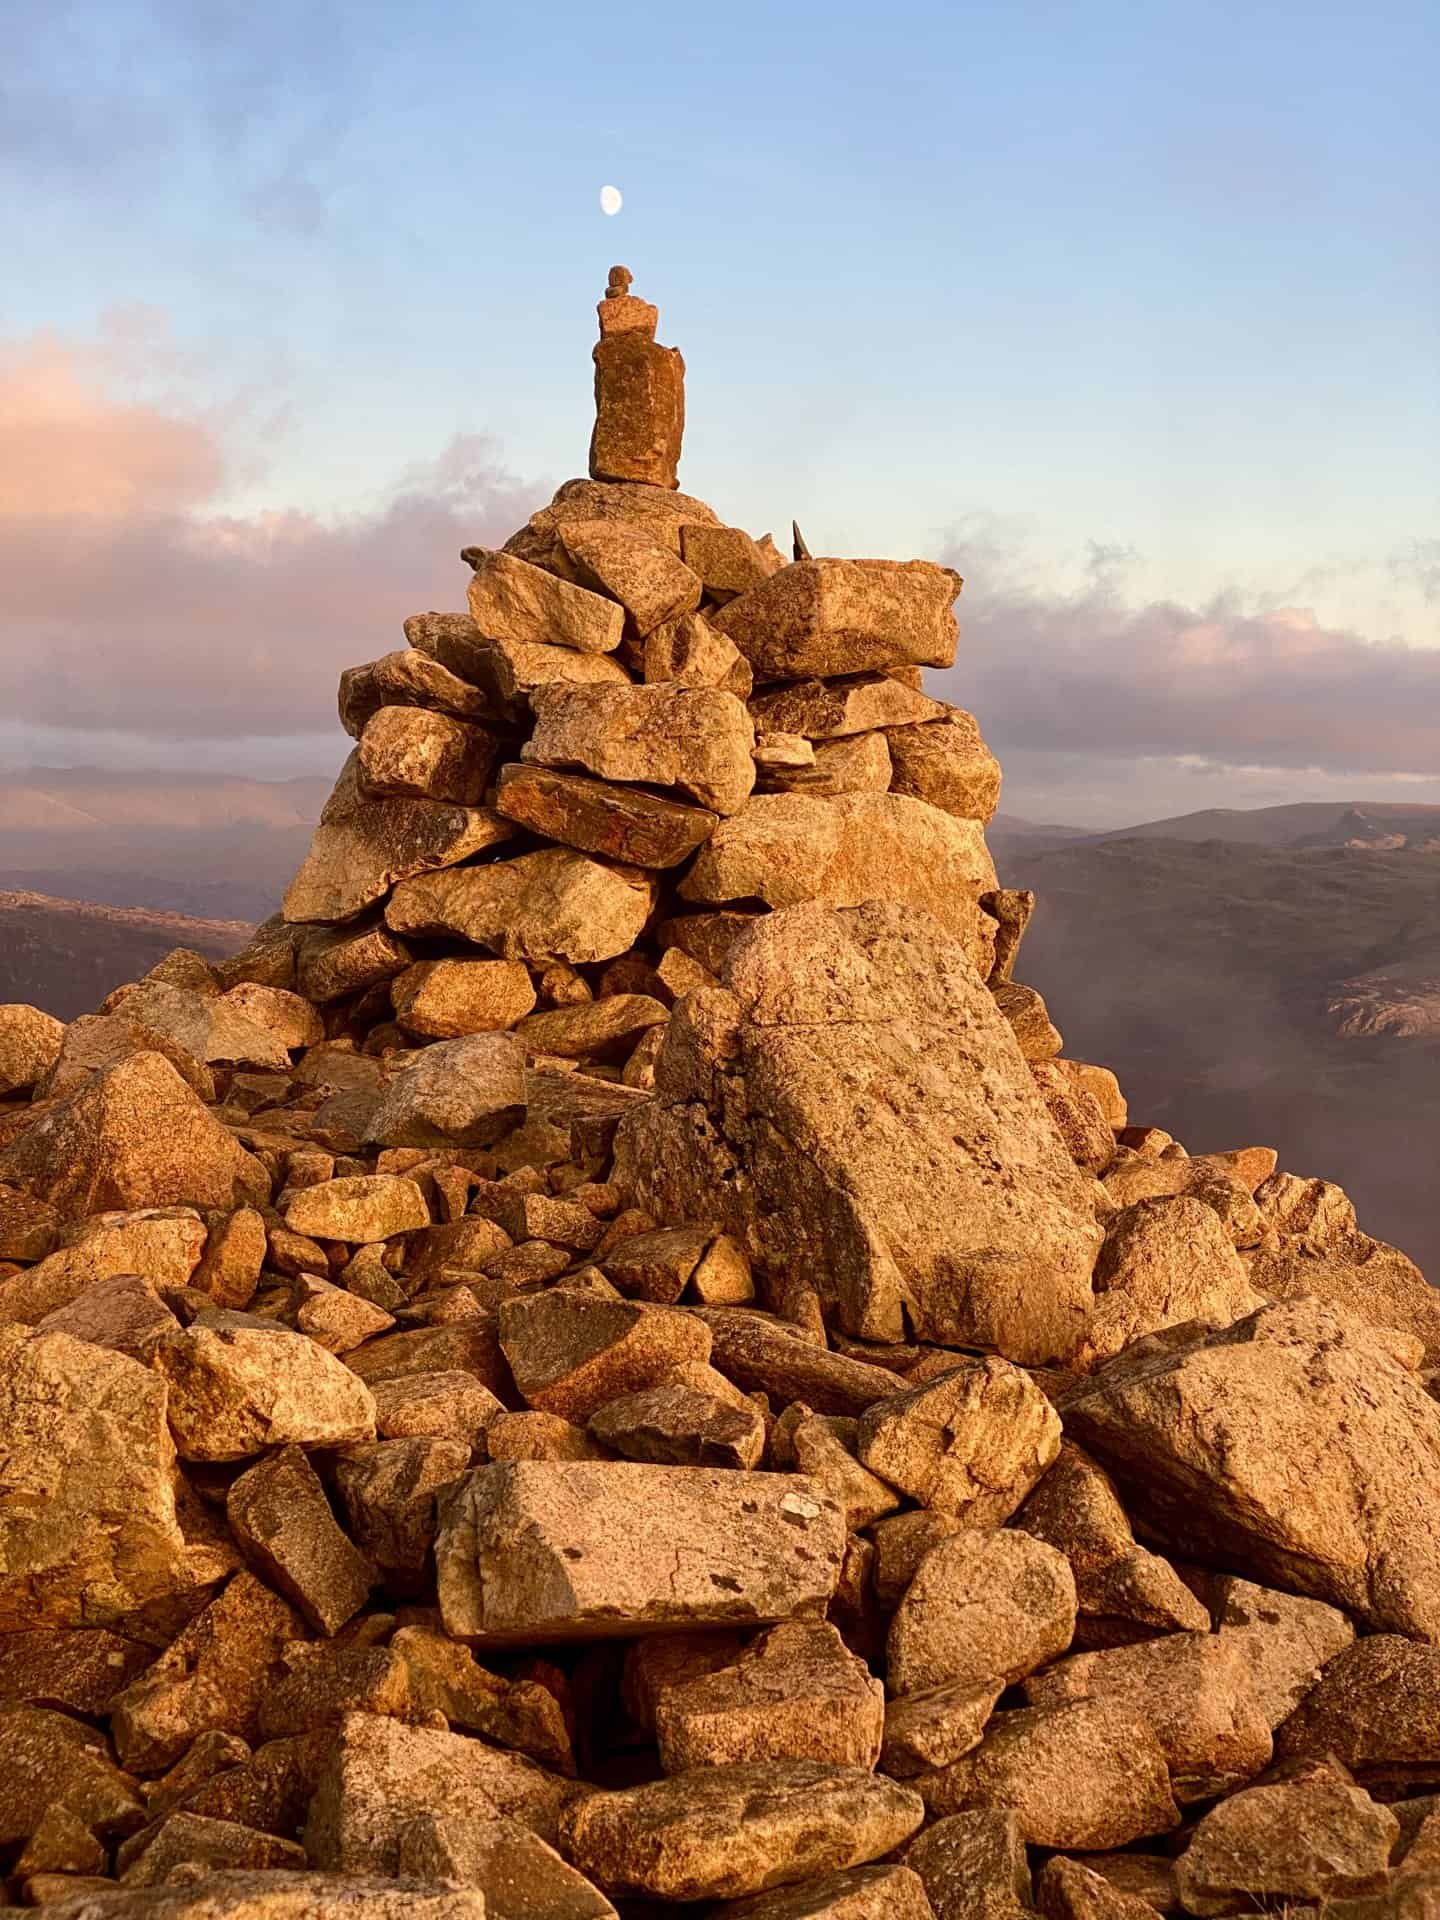 The summit of High Crag, height 744 metres (2441 feet). High Crag is the third and last mountain encountered on this High Stile walk.